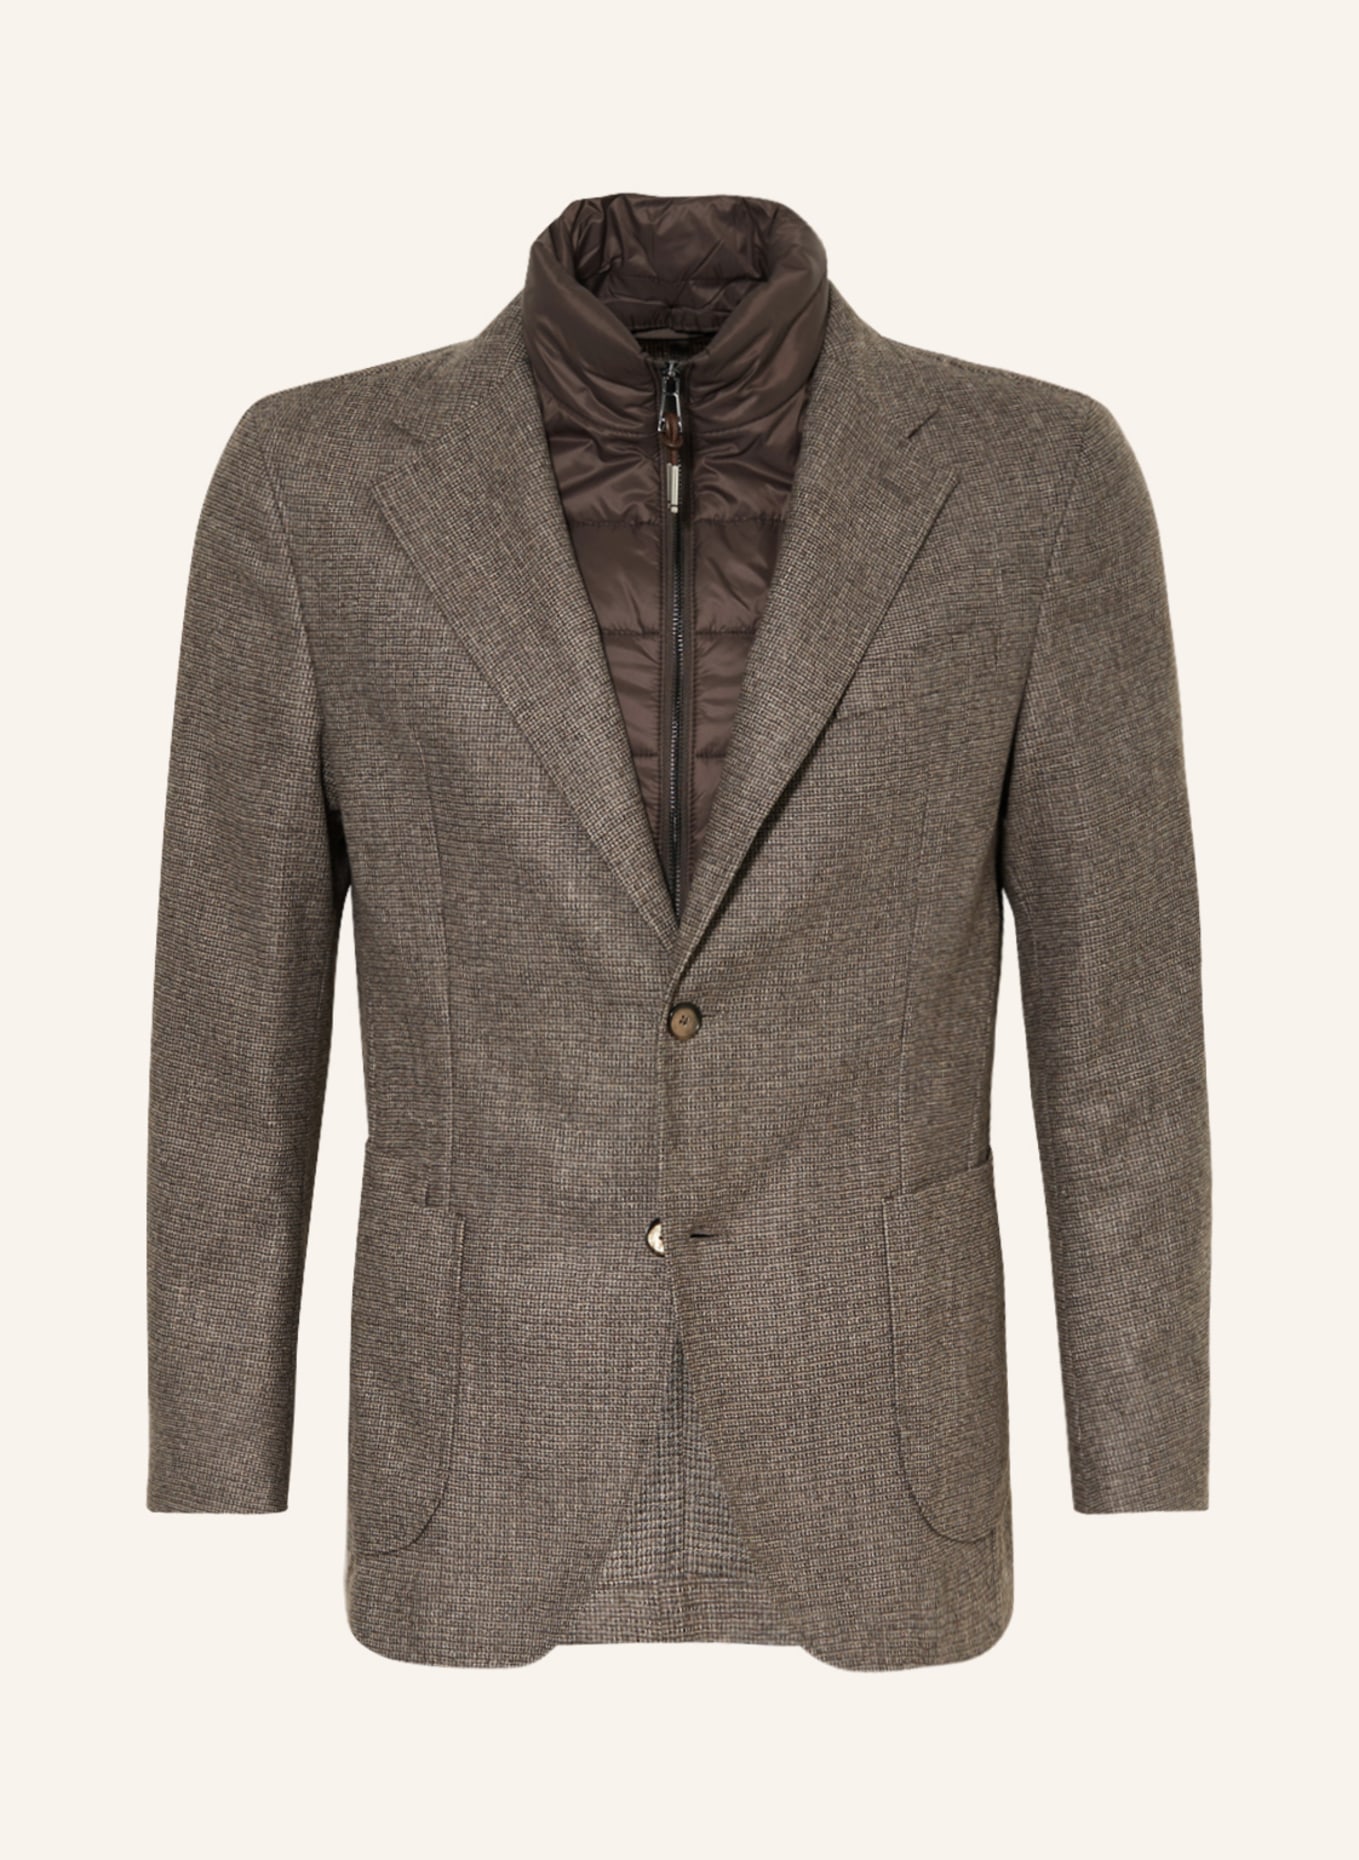 windsor. Tailored jacket TRIEST extra slim fit with detachable trim, Color: DARK BROWN/ BEIGE (Image 1)